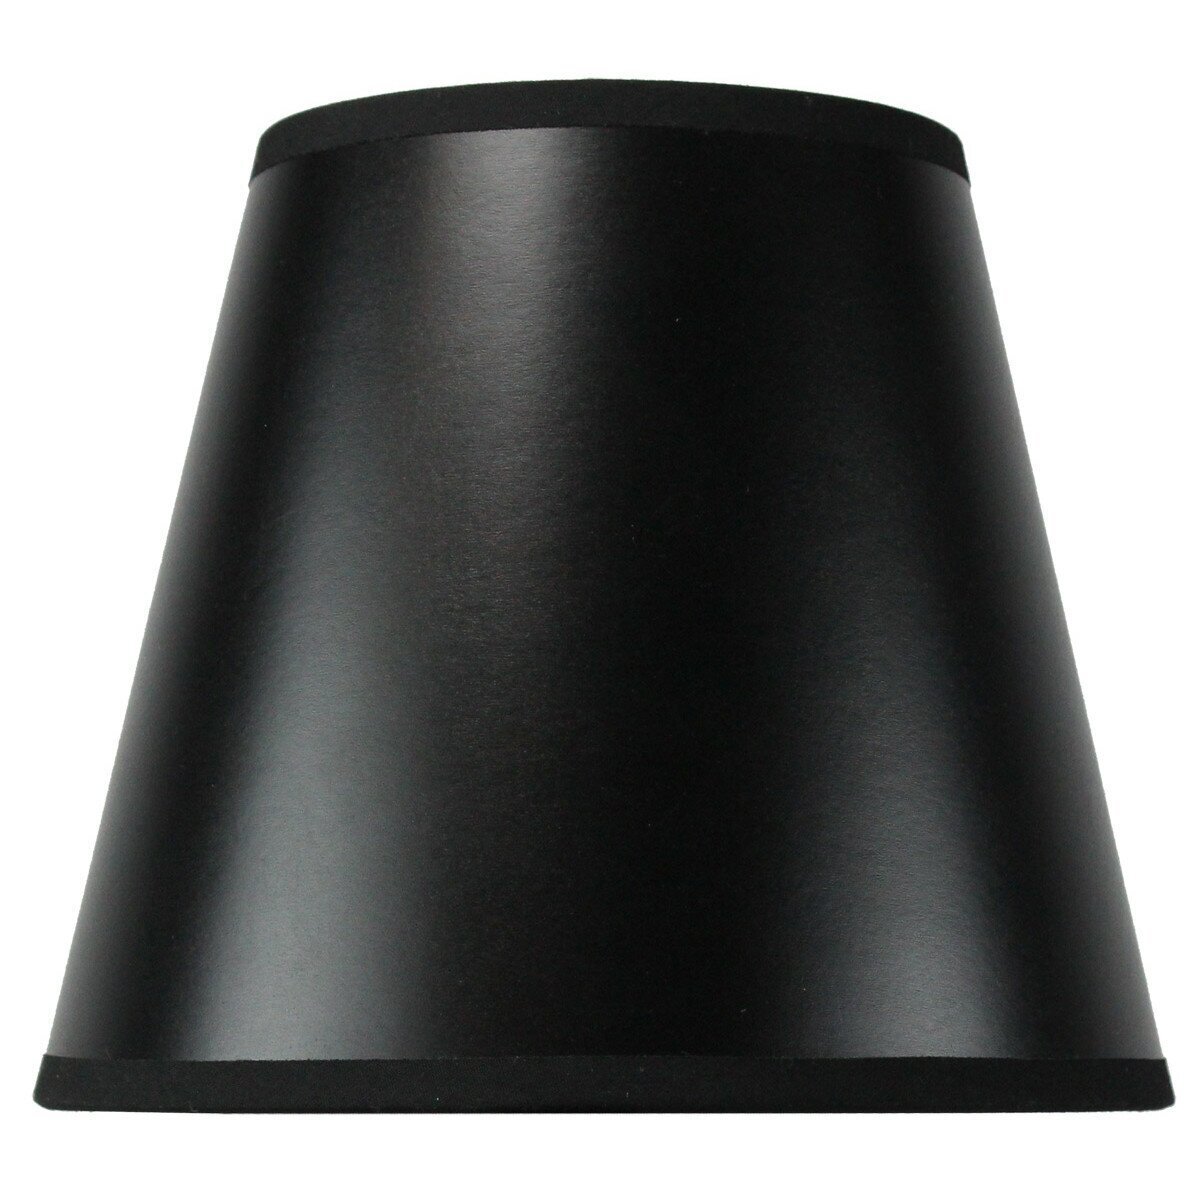 Faux Leather Outdoor Lamp Shade Frame